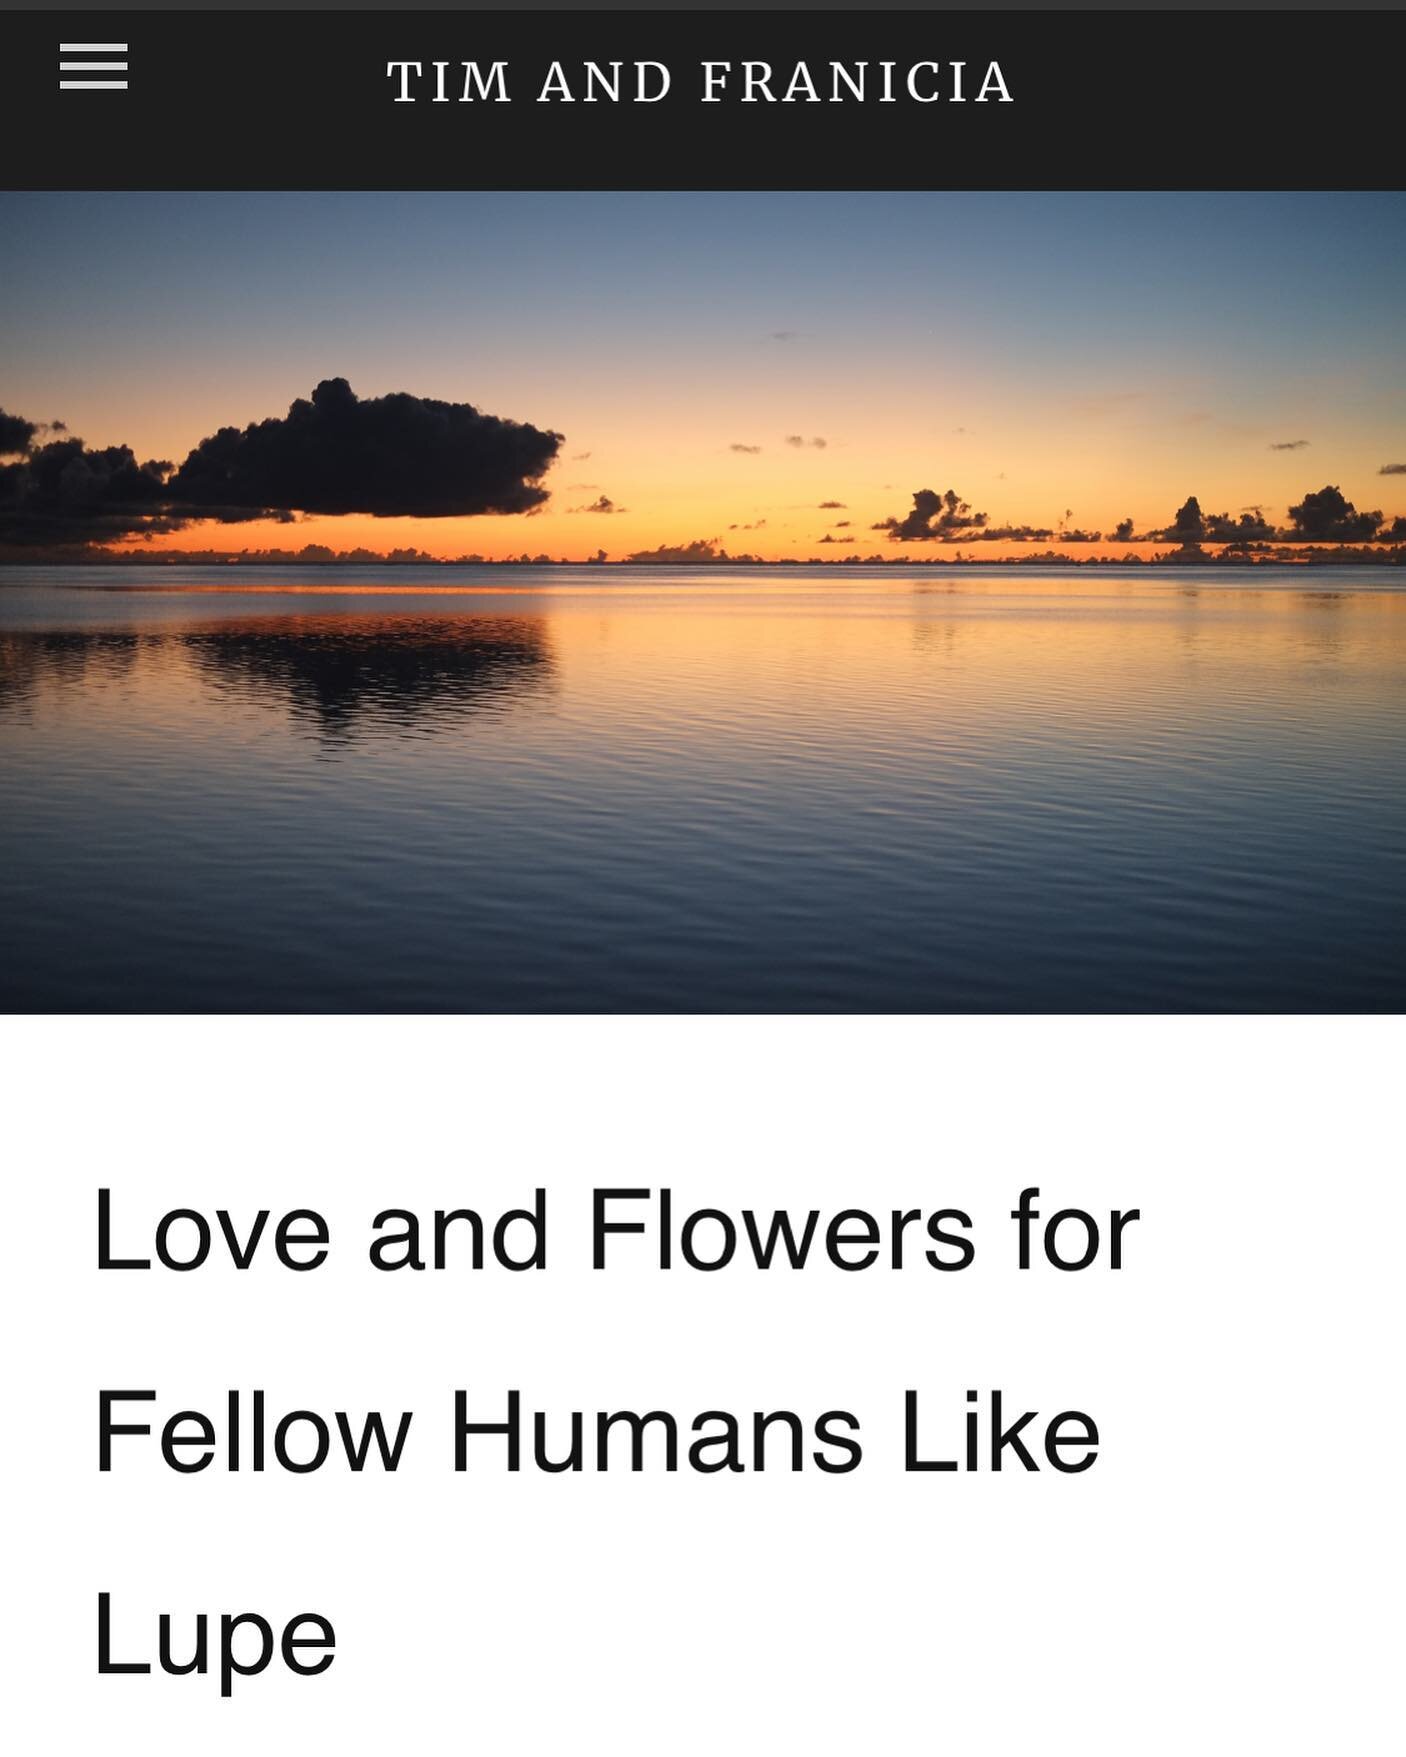 This is a story I shared last Friday on Facebook: https://www.timandfranicia.com/blog/love-and-flowers-for-fellow-humans-like-lupe